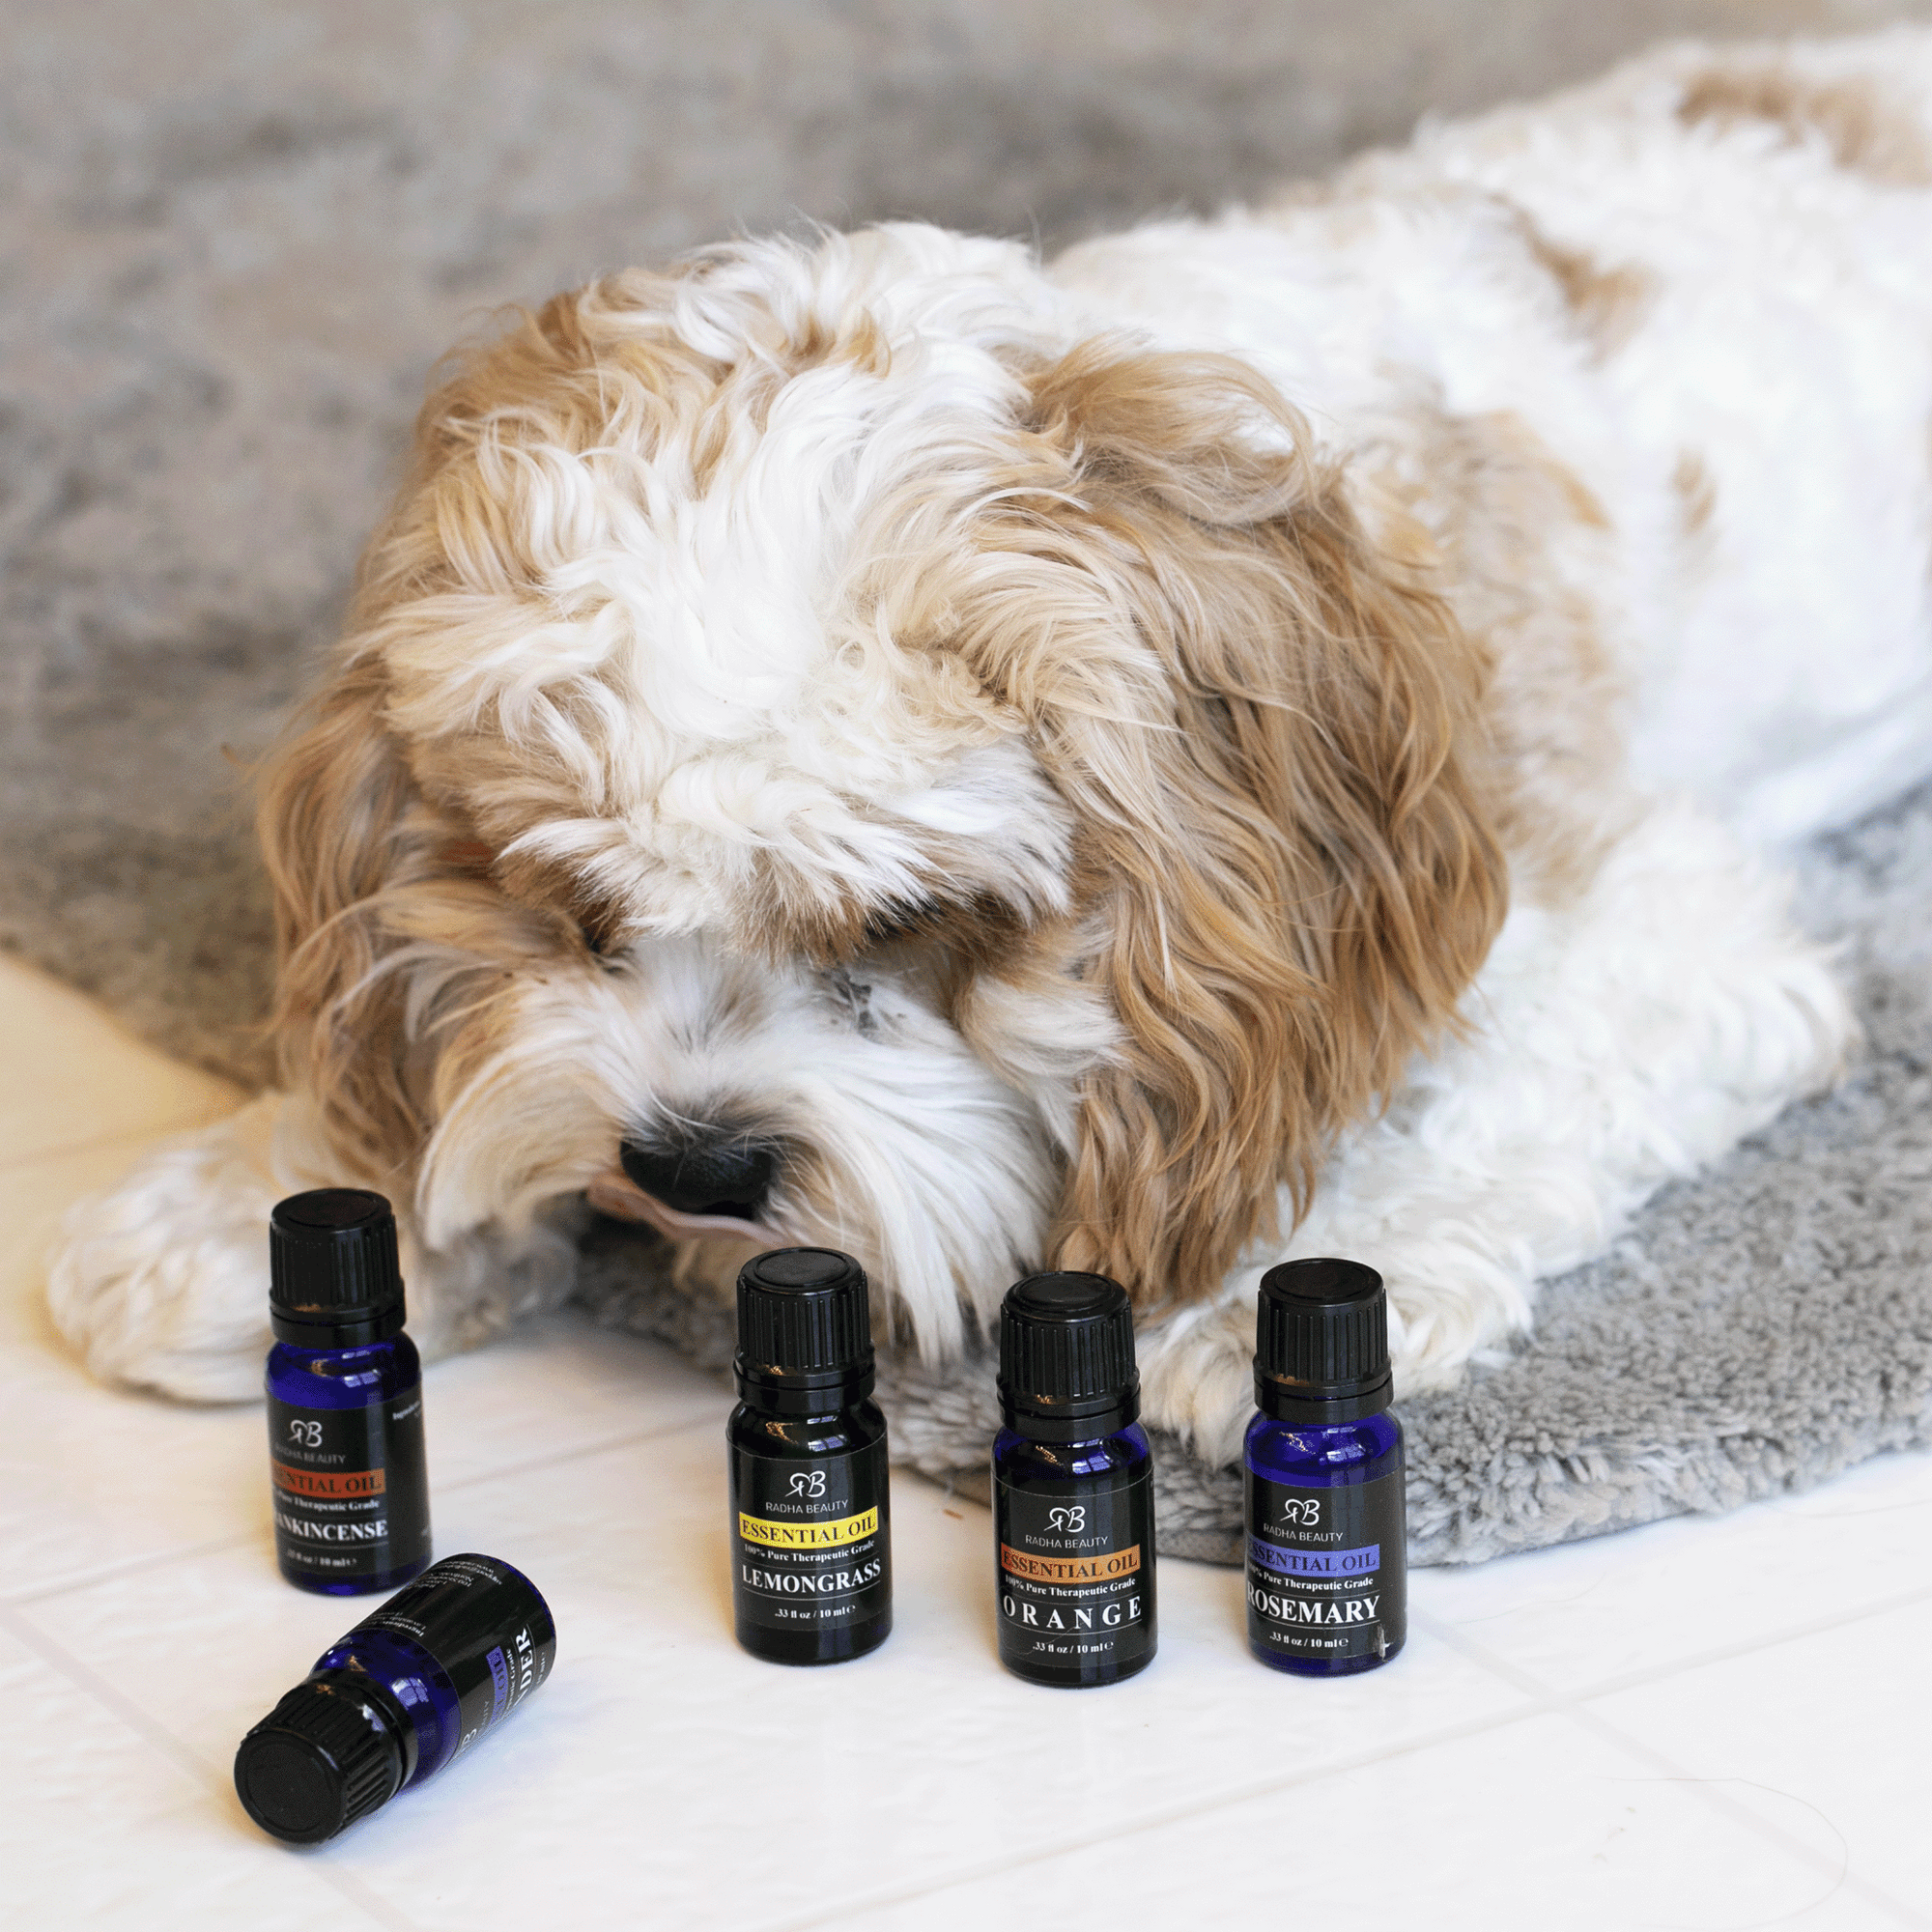 Toxic Essential Oils for Pets